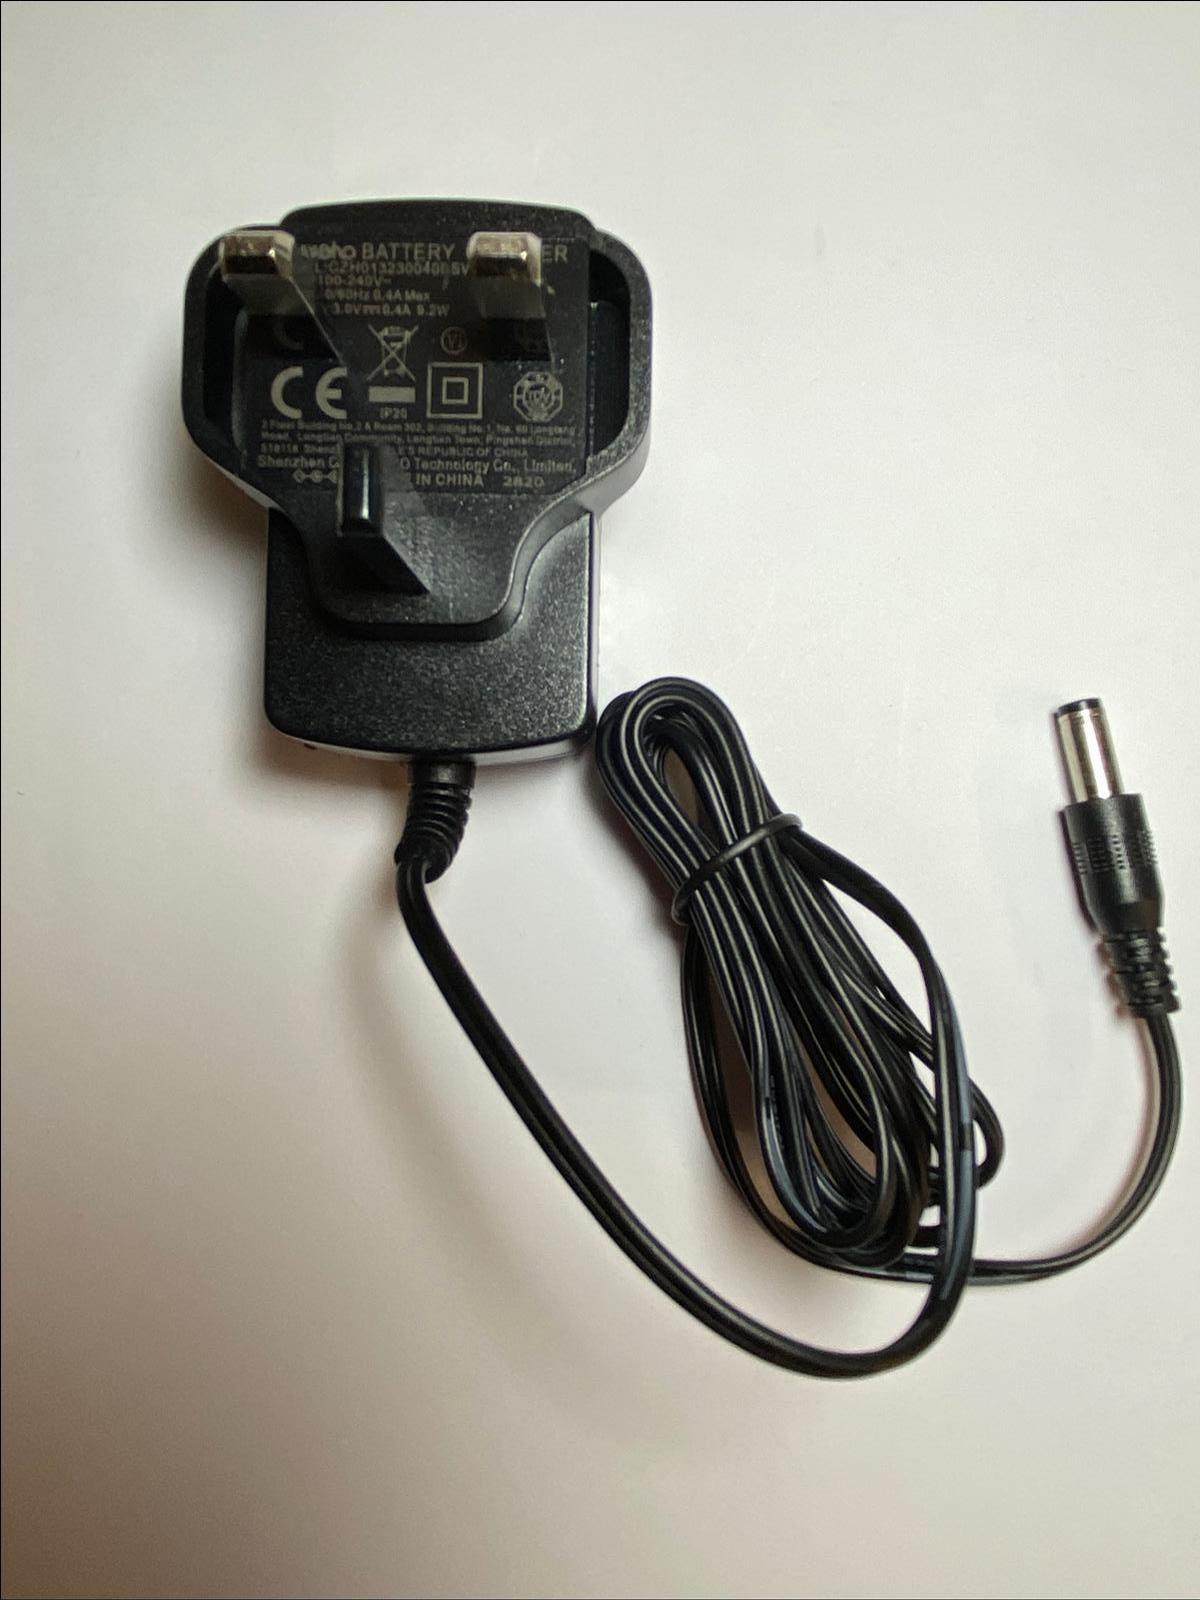 23v 0.4A Adapter Charger Replacement for Black & Decker Dustbuster